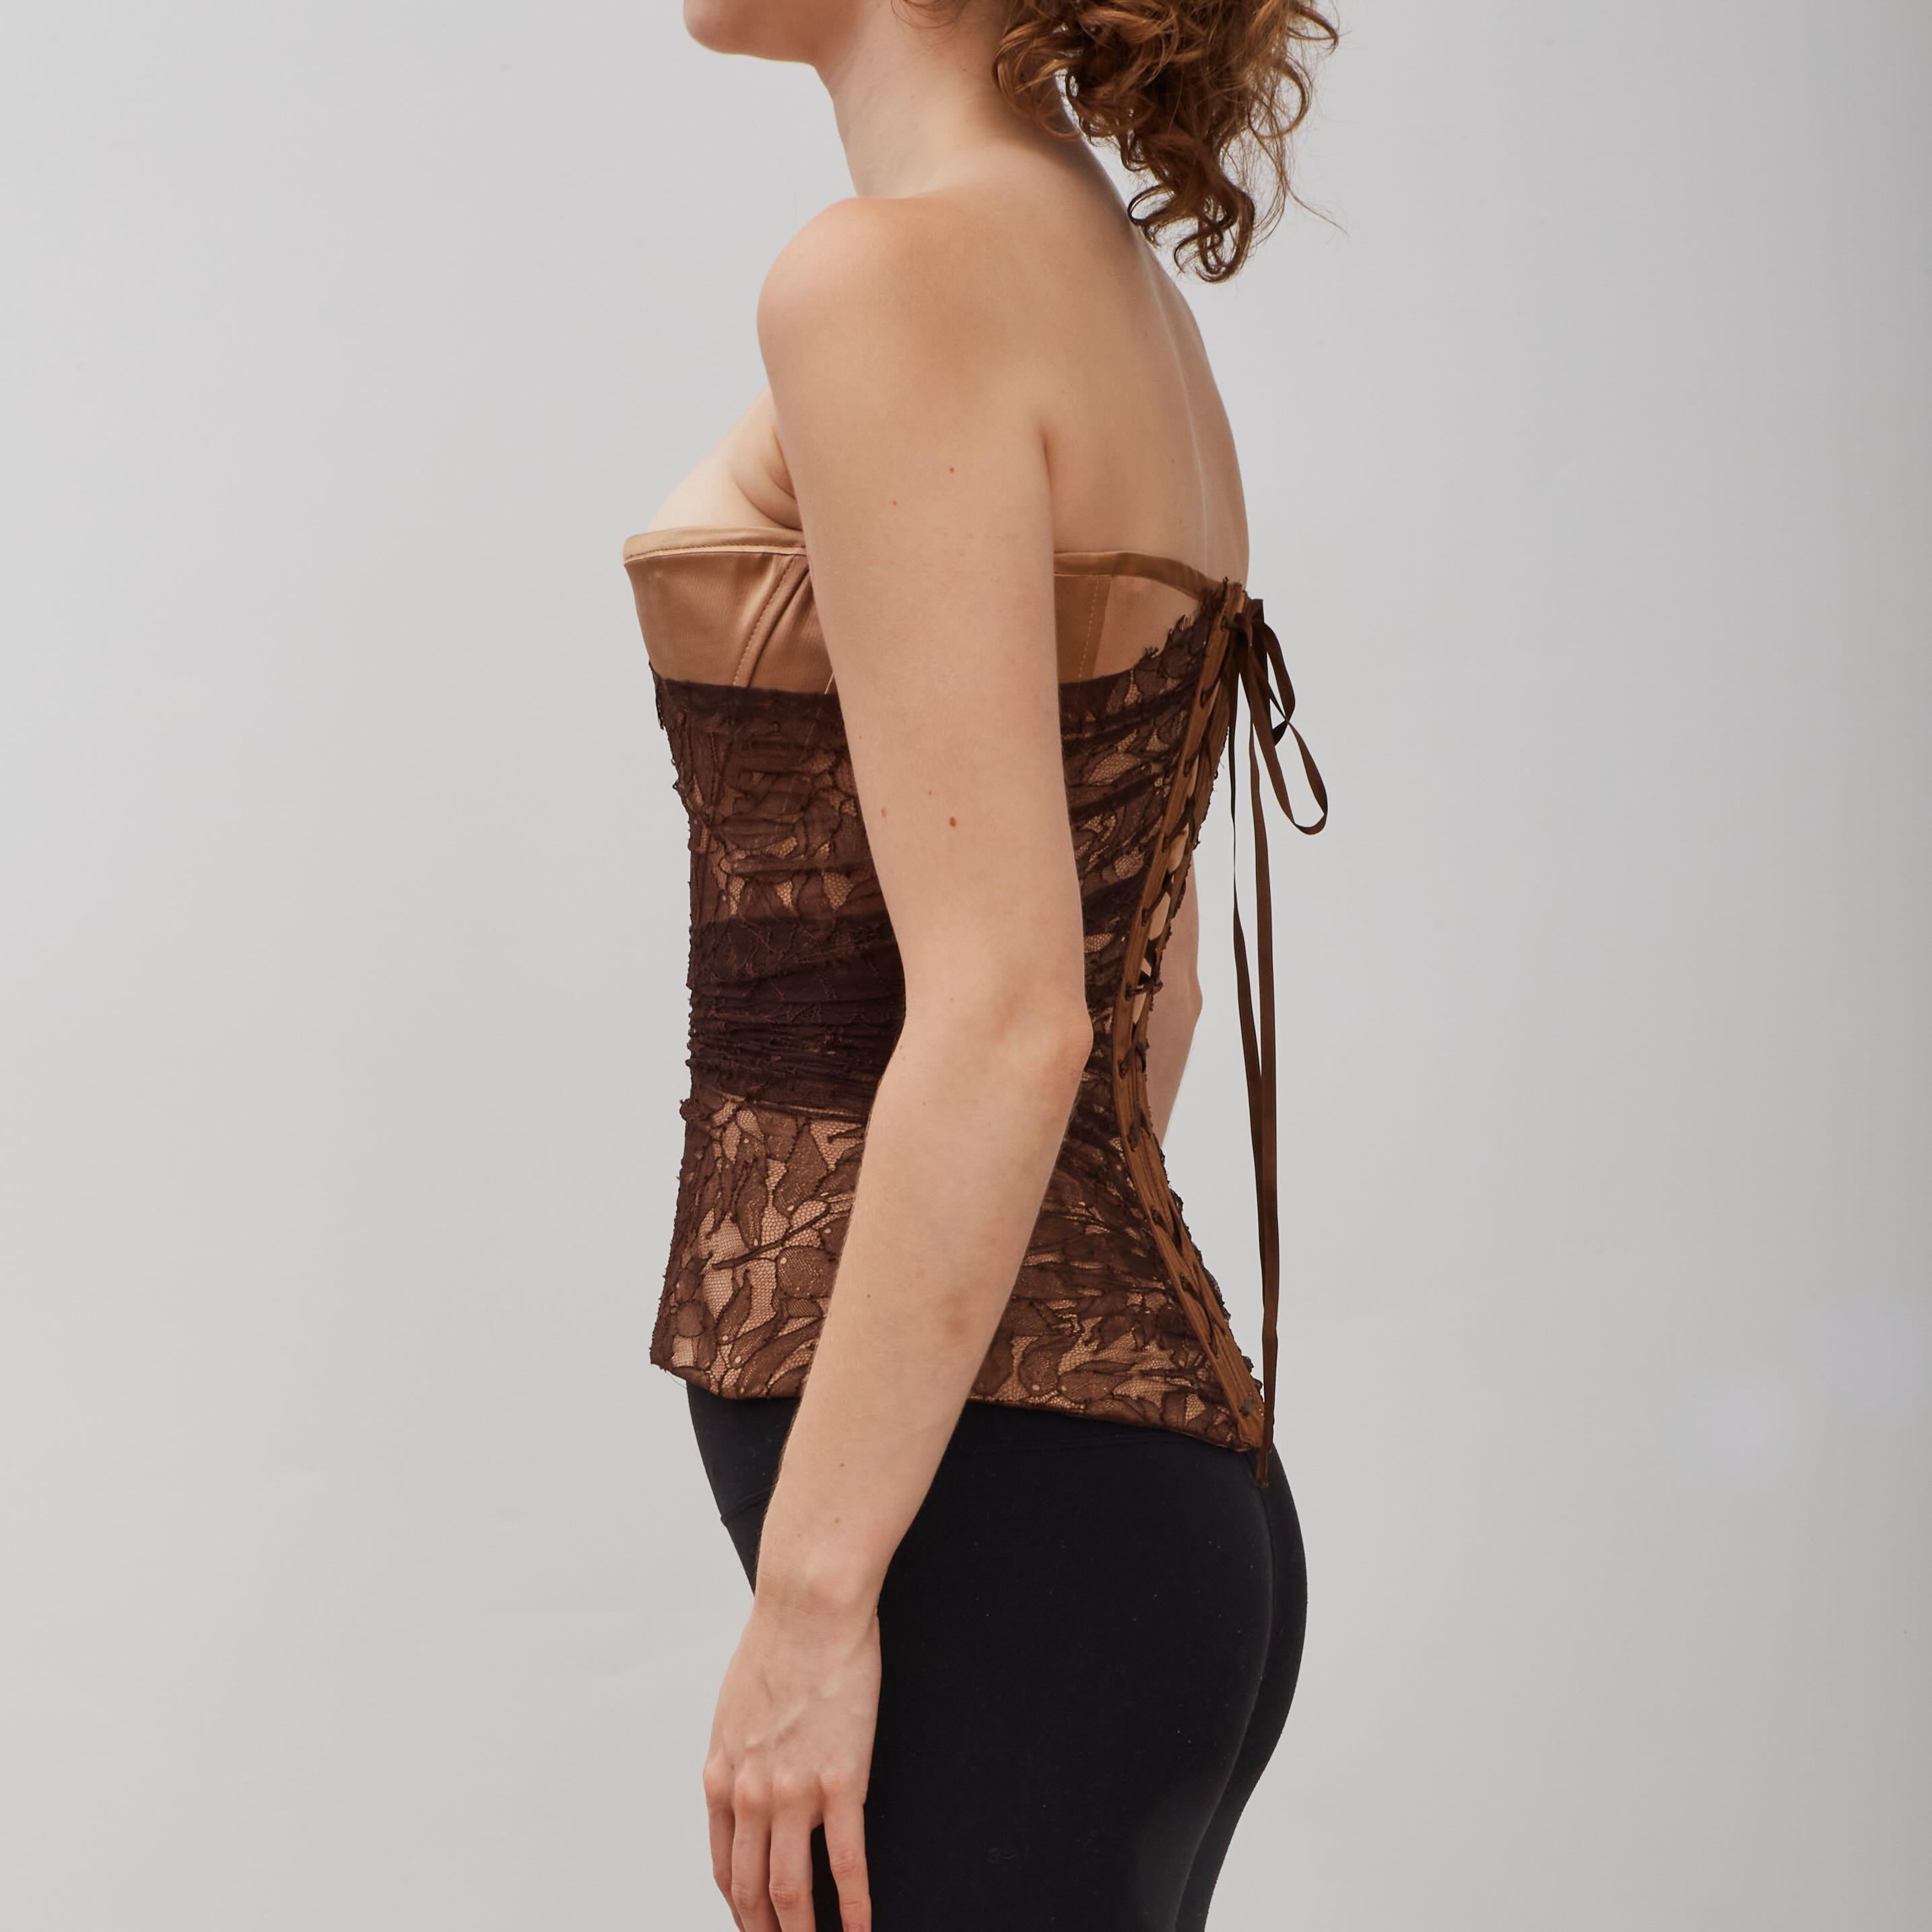 Lace up corset top by Guy Laroche featuring brown tulle lace overlay with floral embroidery. The model is wearing size 38.

COLOR: Brown lace/nude
MATERIAL: 62% polyamide, 38% viscose
CODE: 1SC913

SIZE: FR40  Medium

CONDITION: Excellent - like